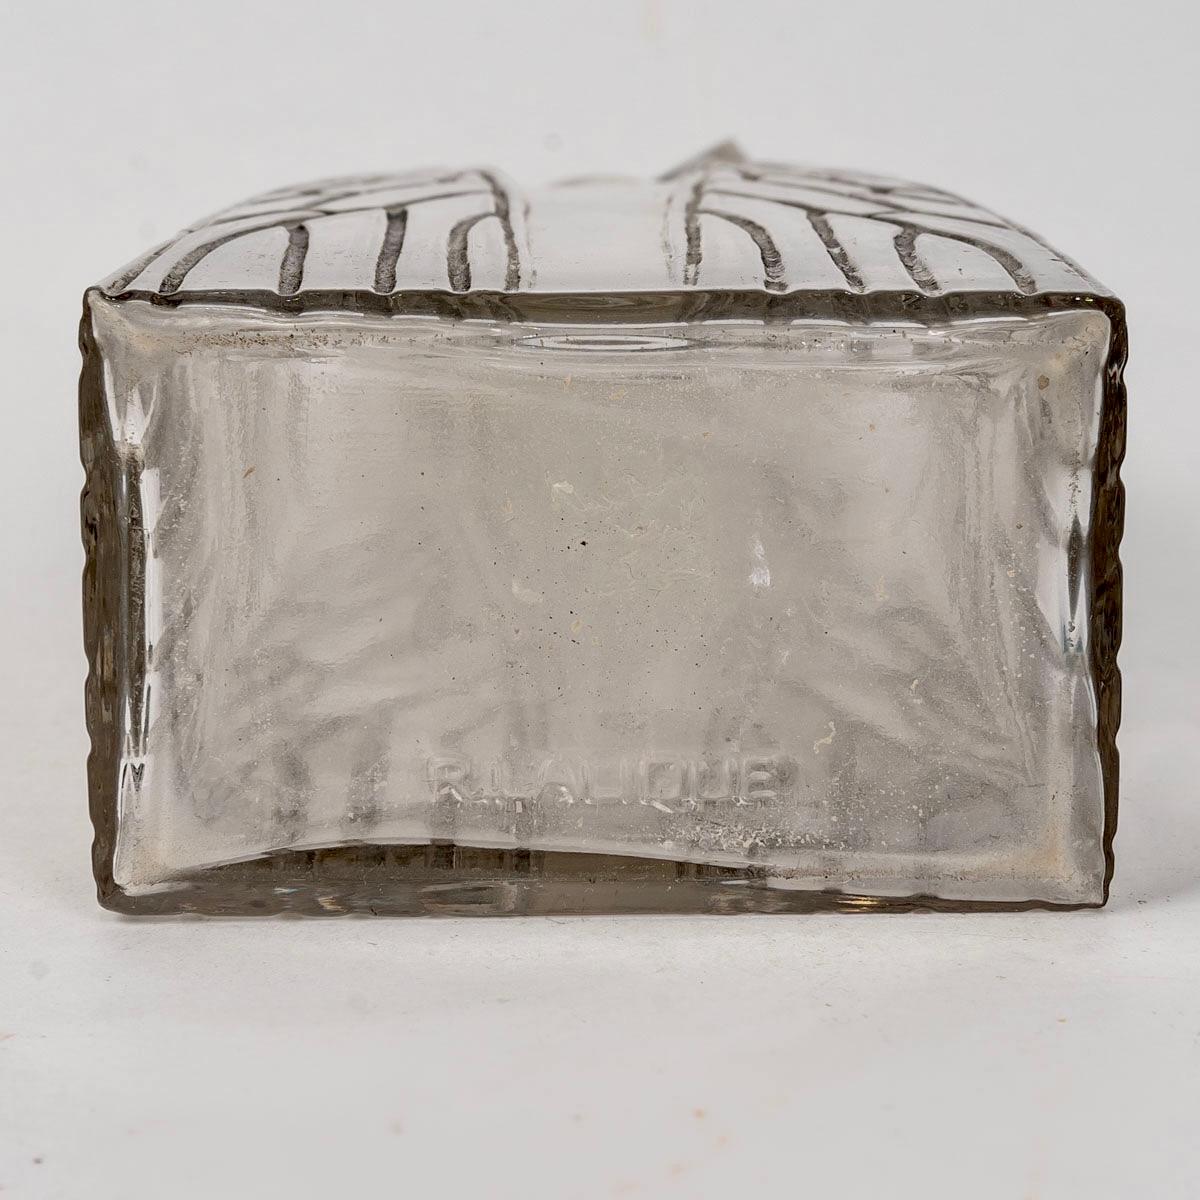 1910 Rene Lalique Perfume Bottle Cigalia for Roger & Gallet Glass Grey Patina In Good Condition For Sale In Boulogne Billancourt, FR